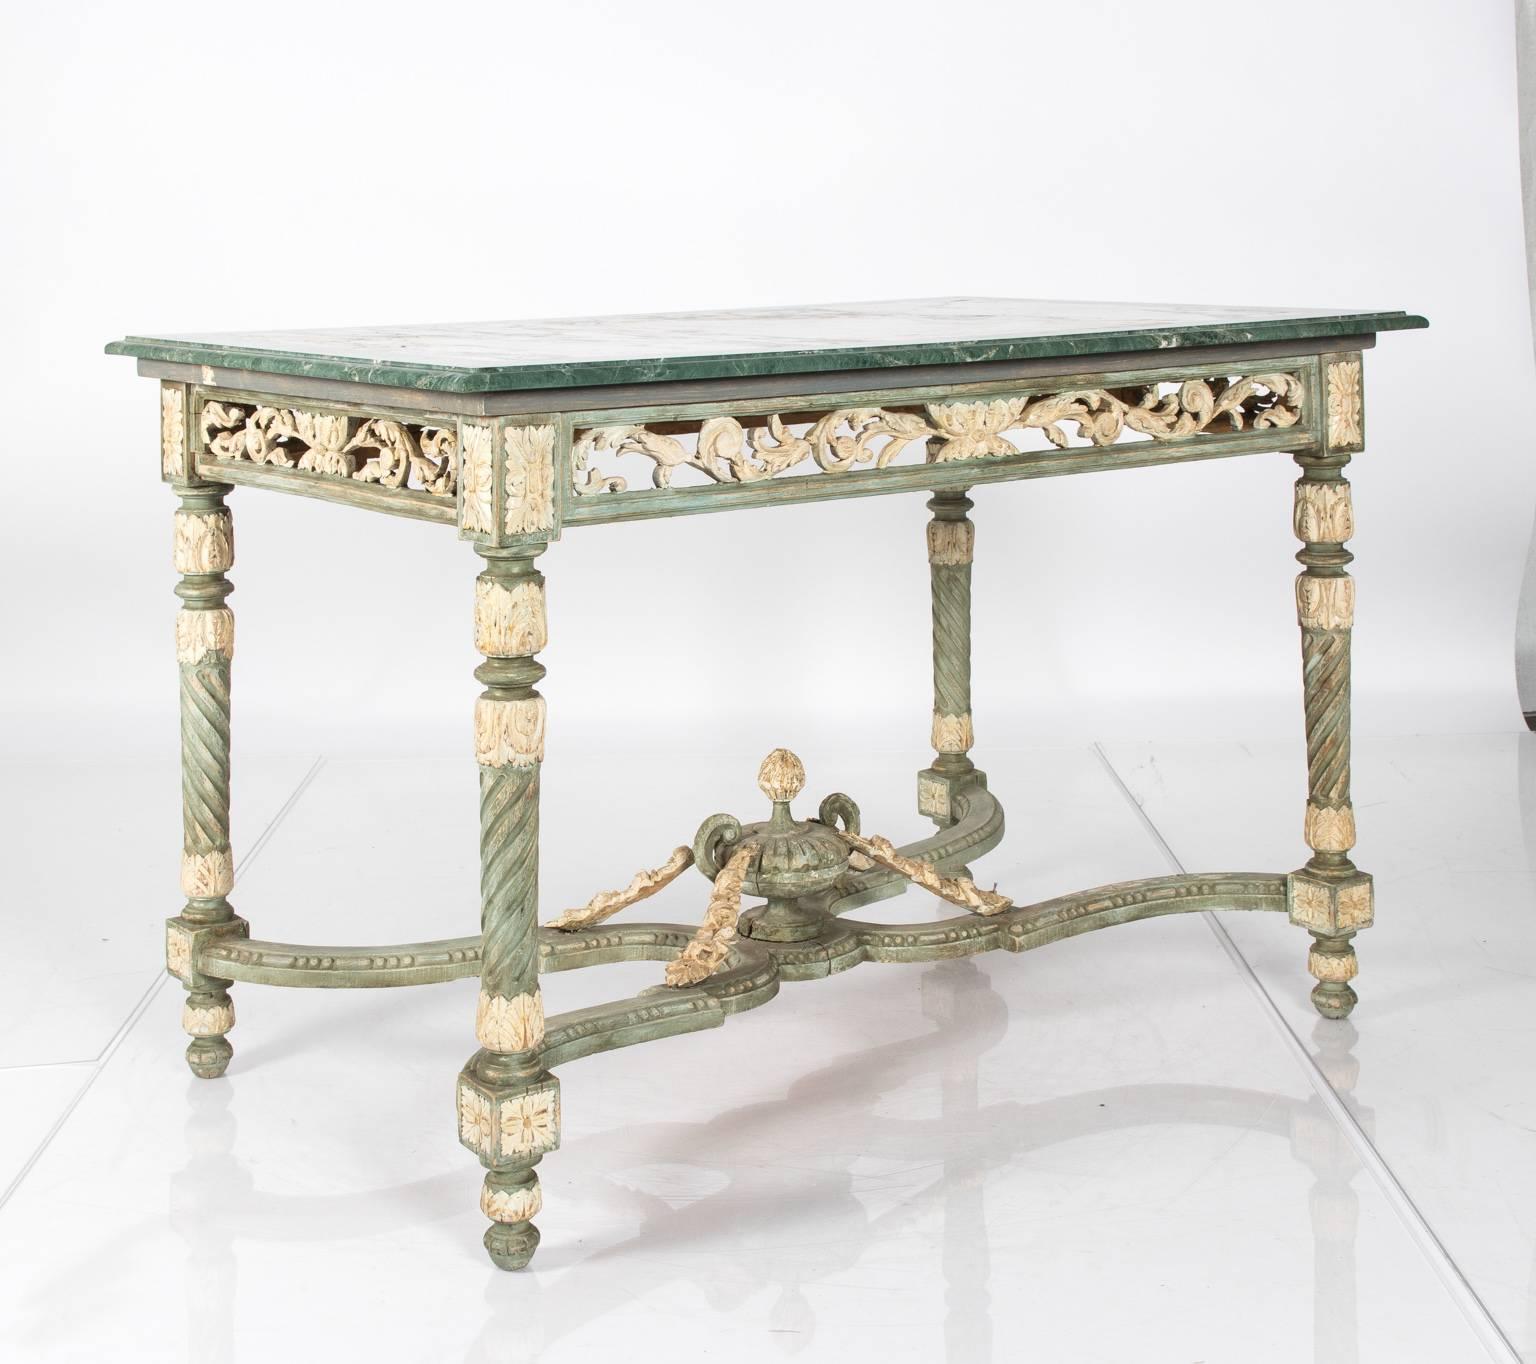 19th century French Napoleon III style table with marble top and carved base.
 